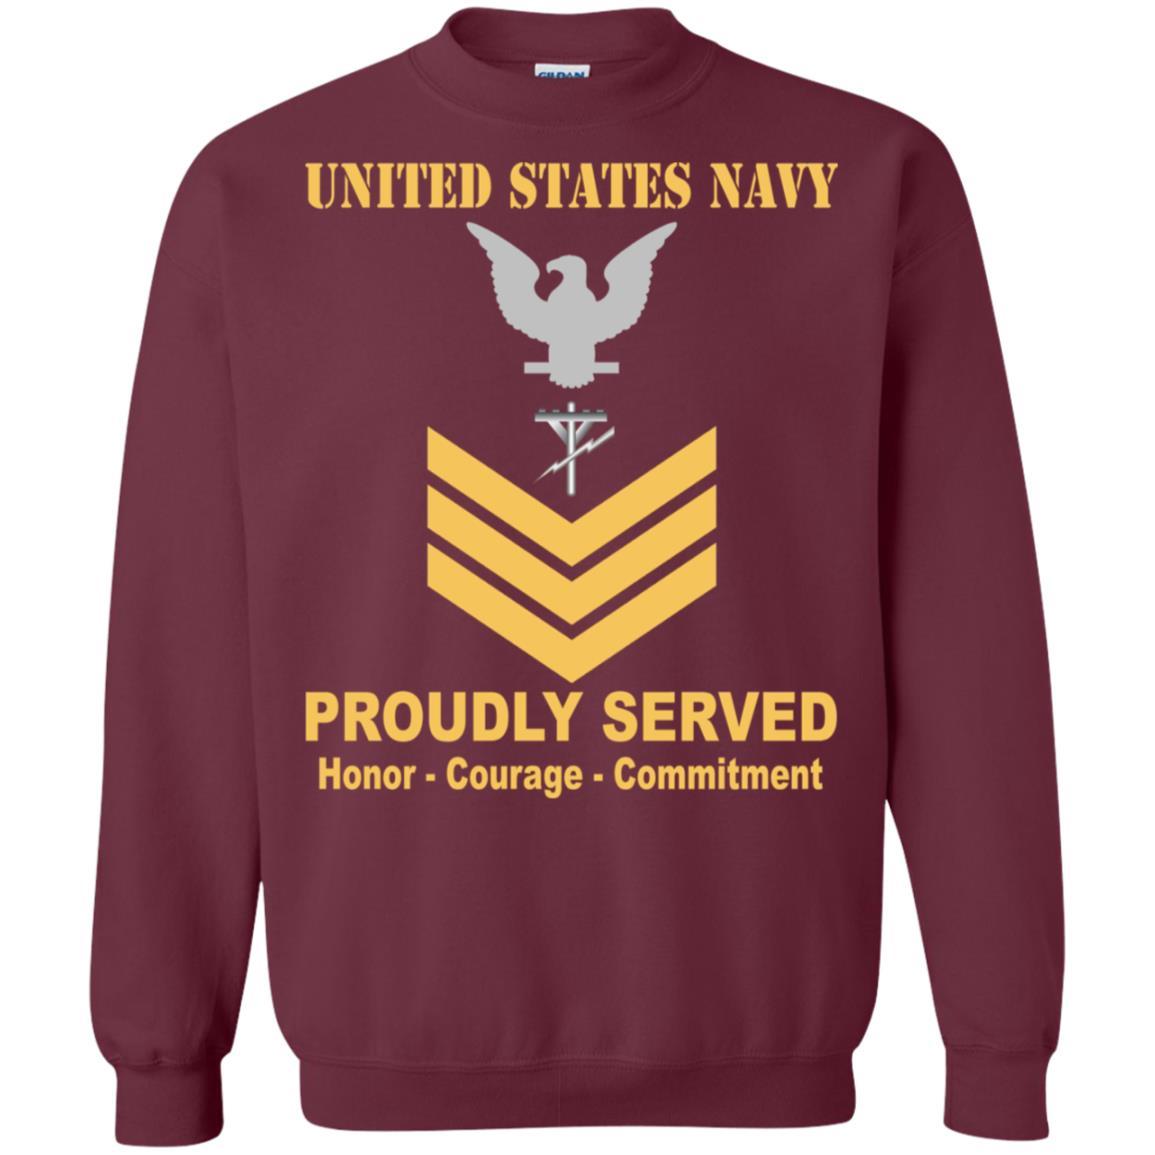 Navy Construction Electrician Navy CE E-6 Rating Badges Proudly Served T-Shirt For Men On Front-TShirt-Navy-Veterans Nation